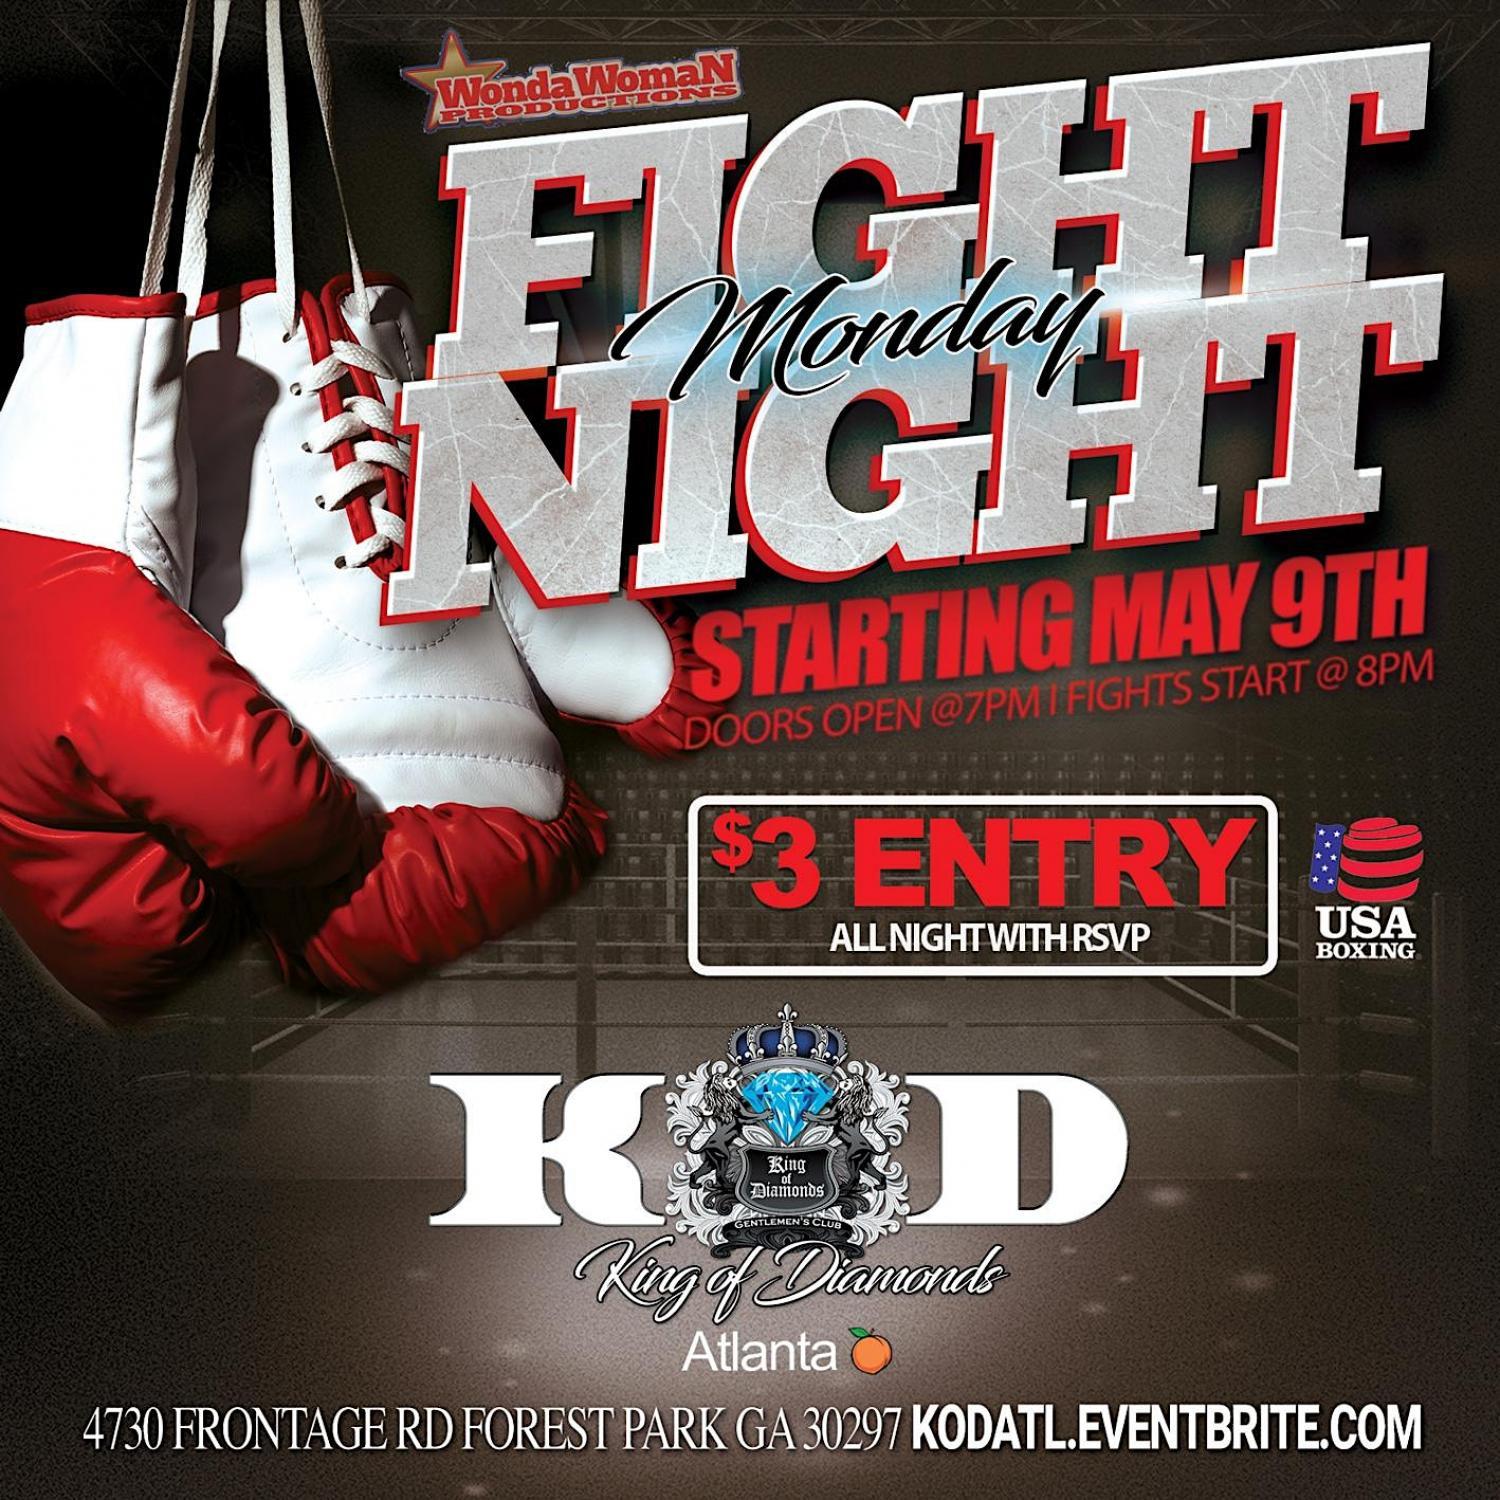 Monday Night Fight Night Live with USAA boxing!
Mon Dec 26, 7:00 PM - Tue Dec 27, 4:00 AM
in 52 days